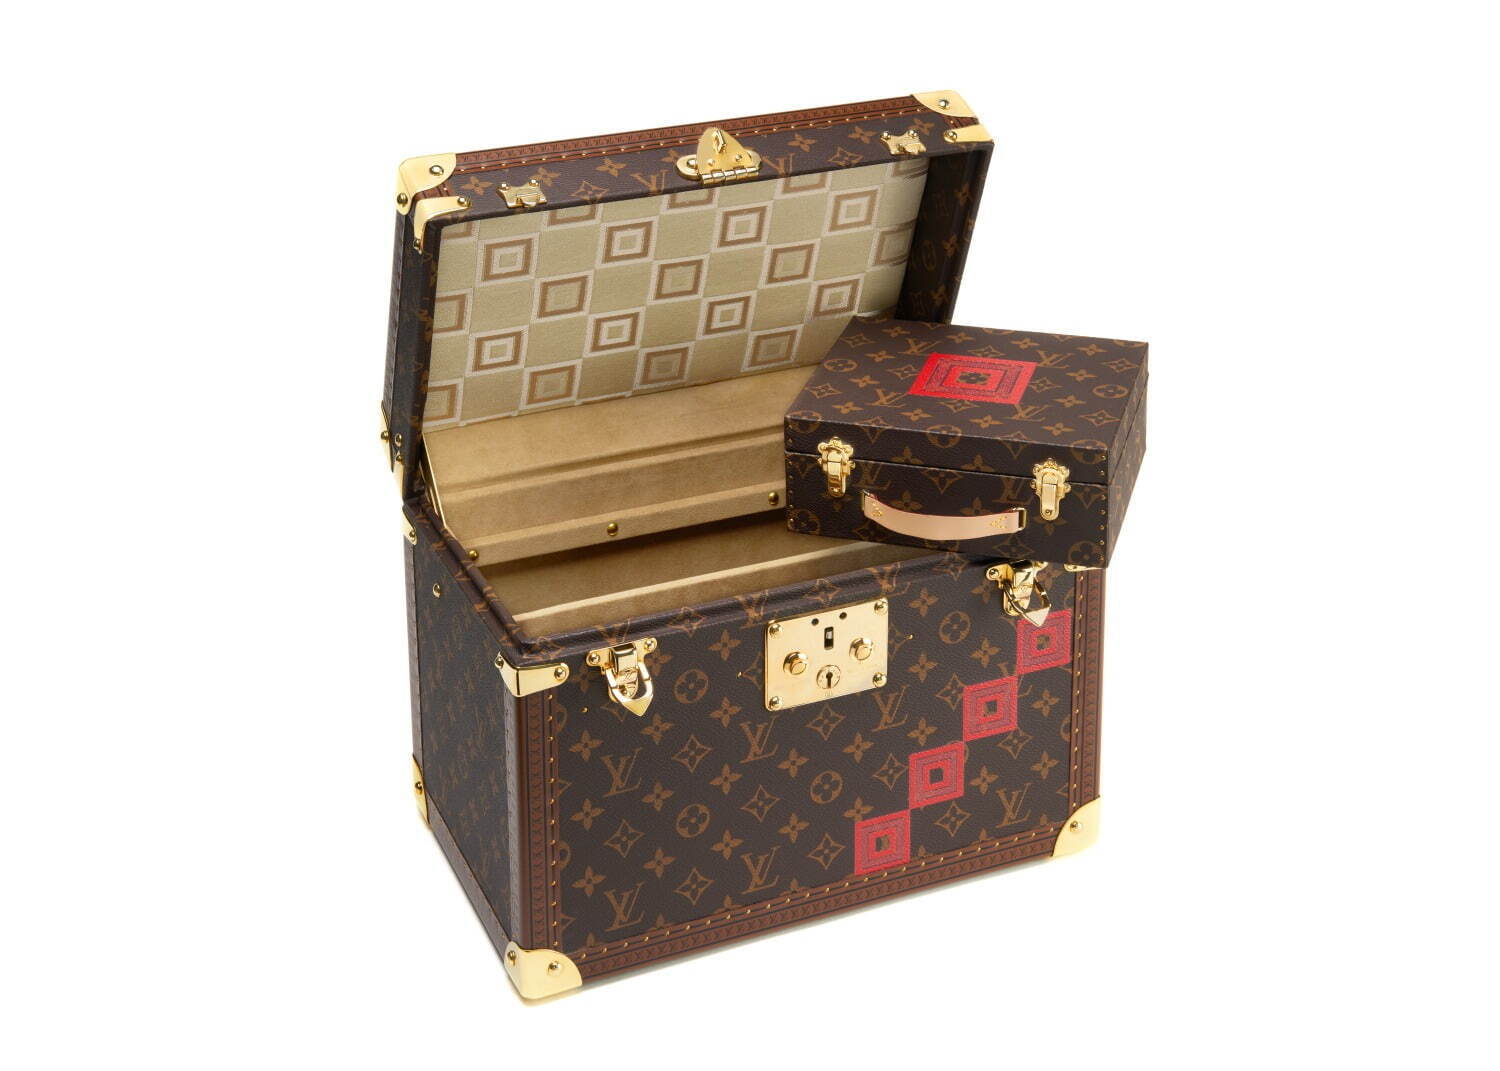 Louis Vuitton revealed limited edition items for the new store in Tokyo